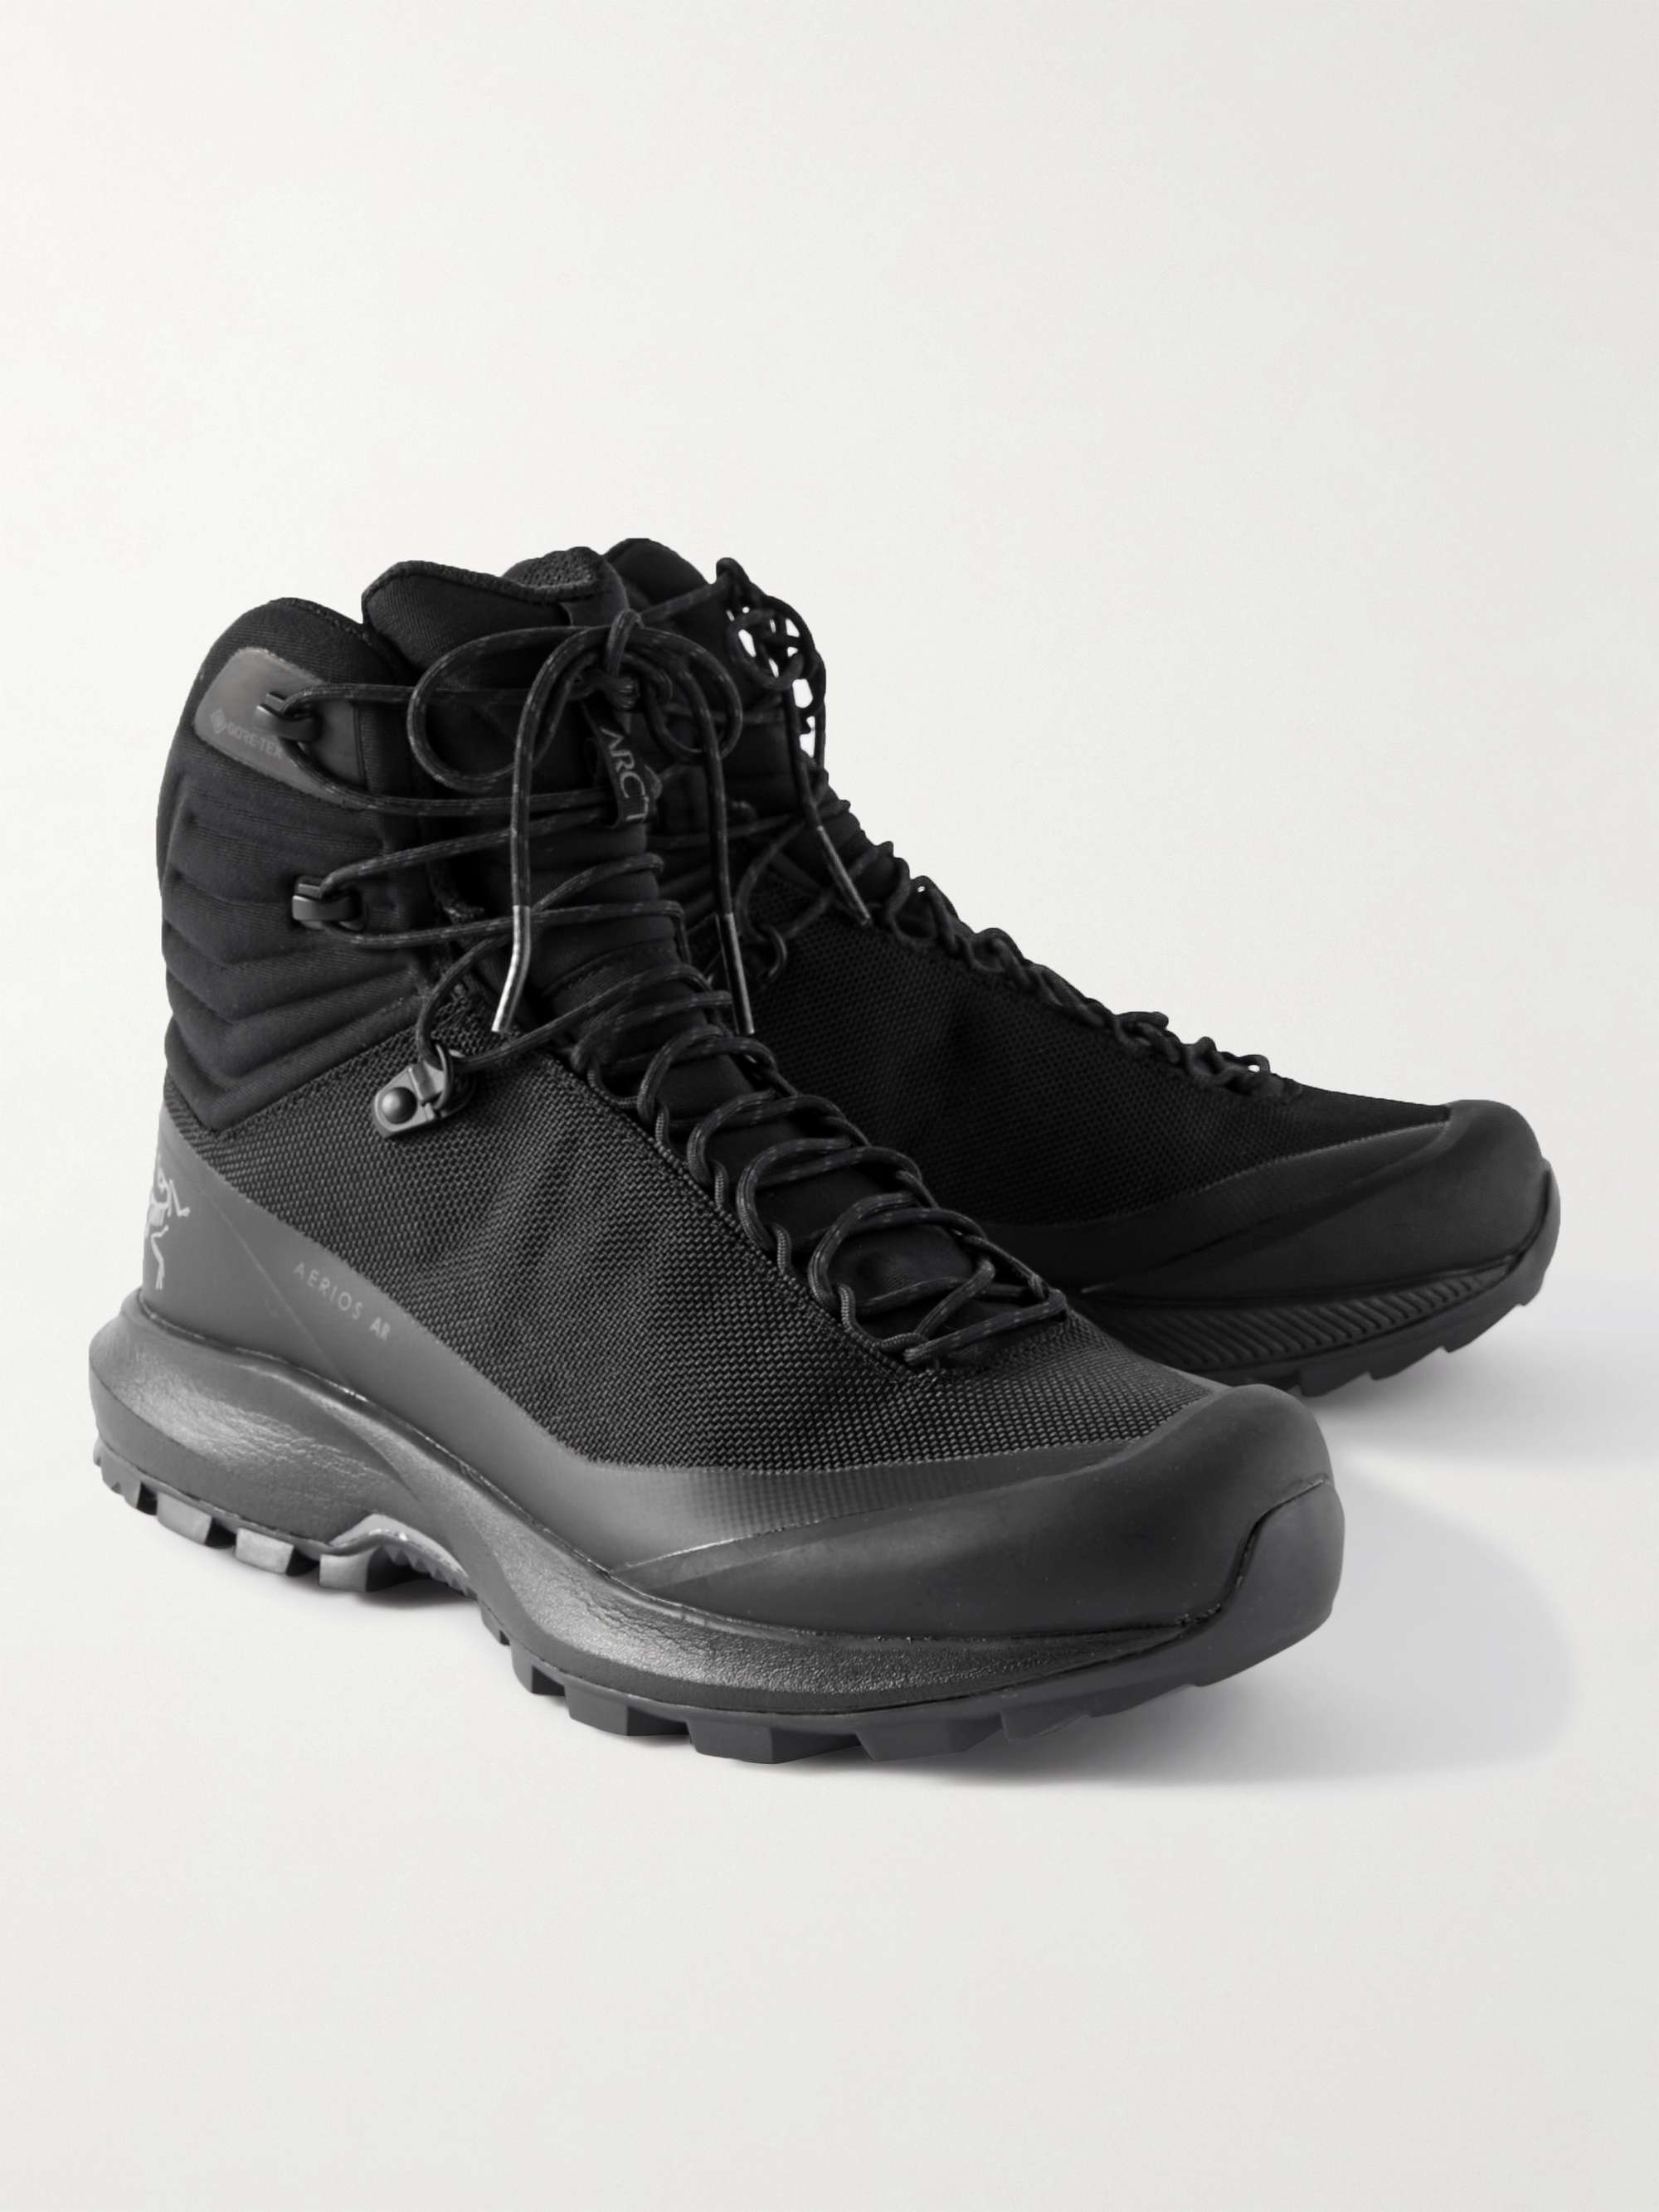 Aerios AR Mid GTX Rubber-Trimmed GORE-TEX Hiking Boots